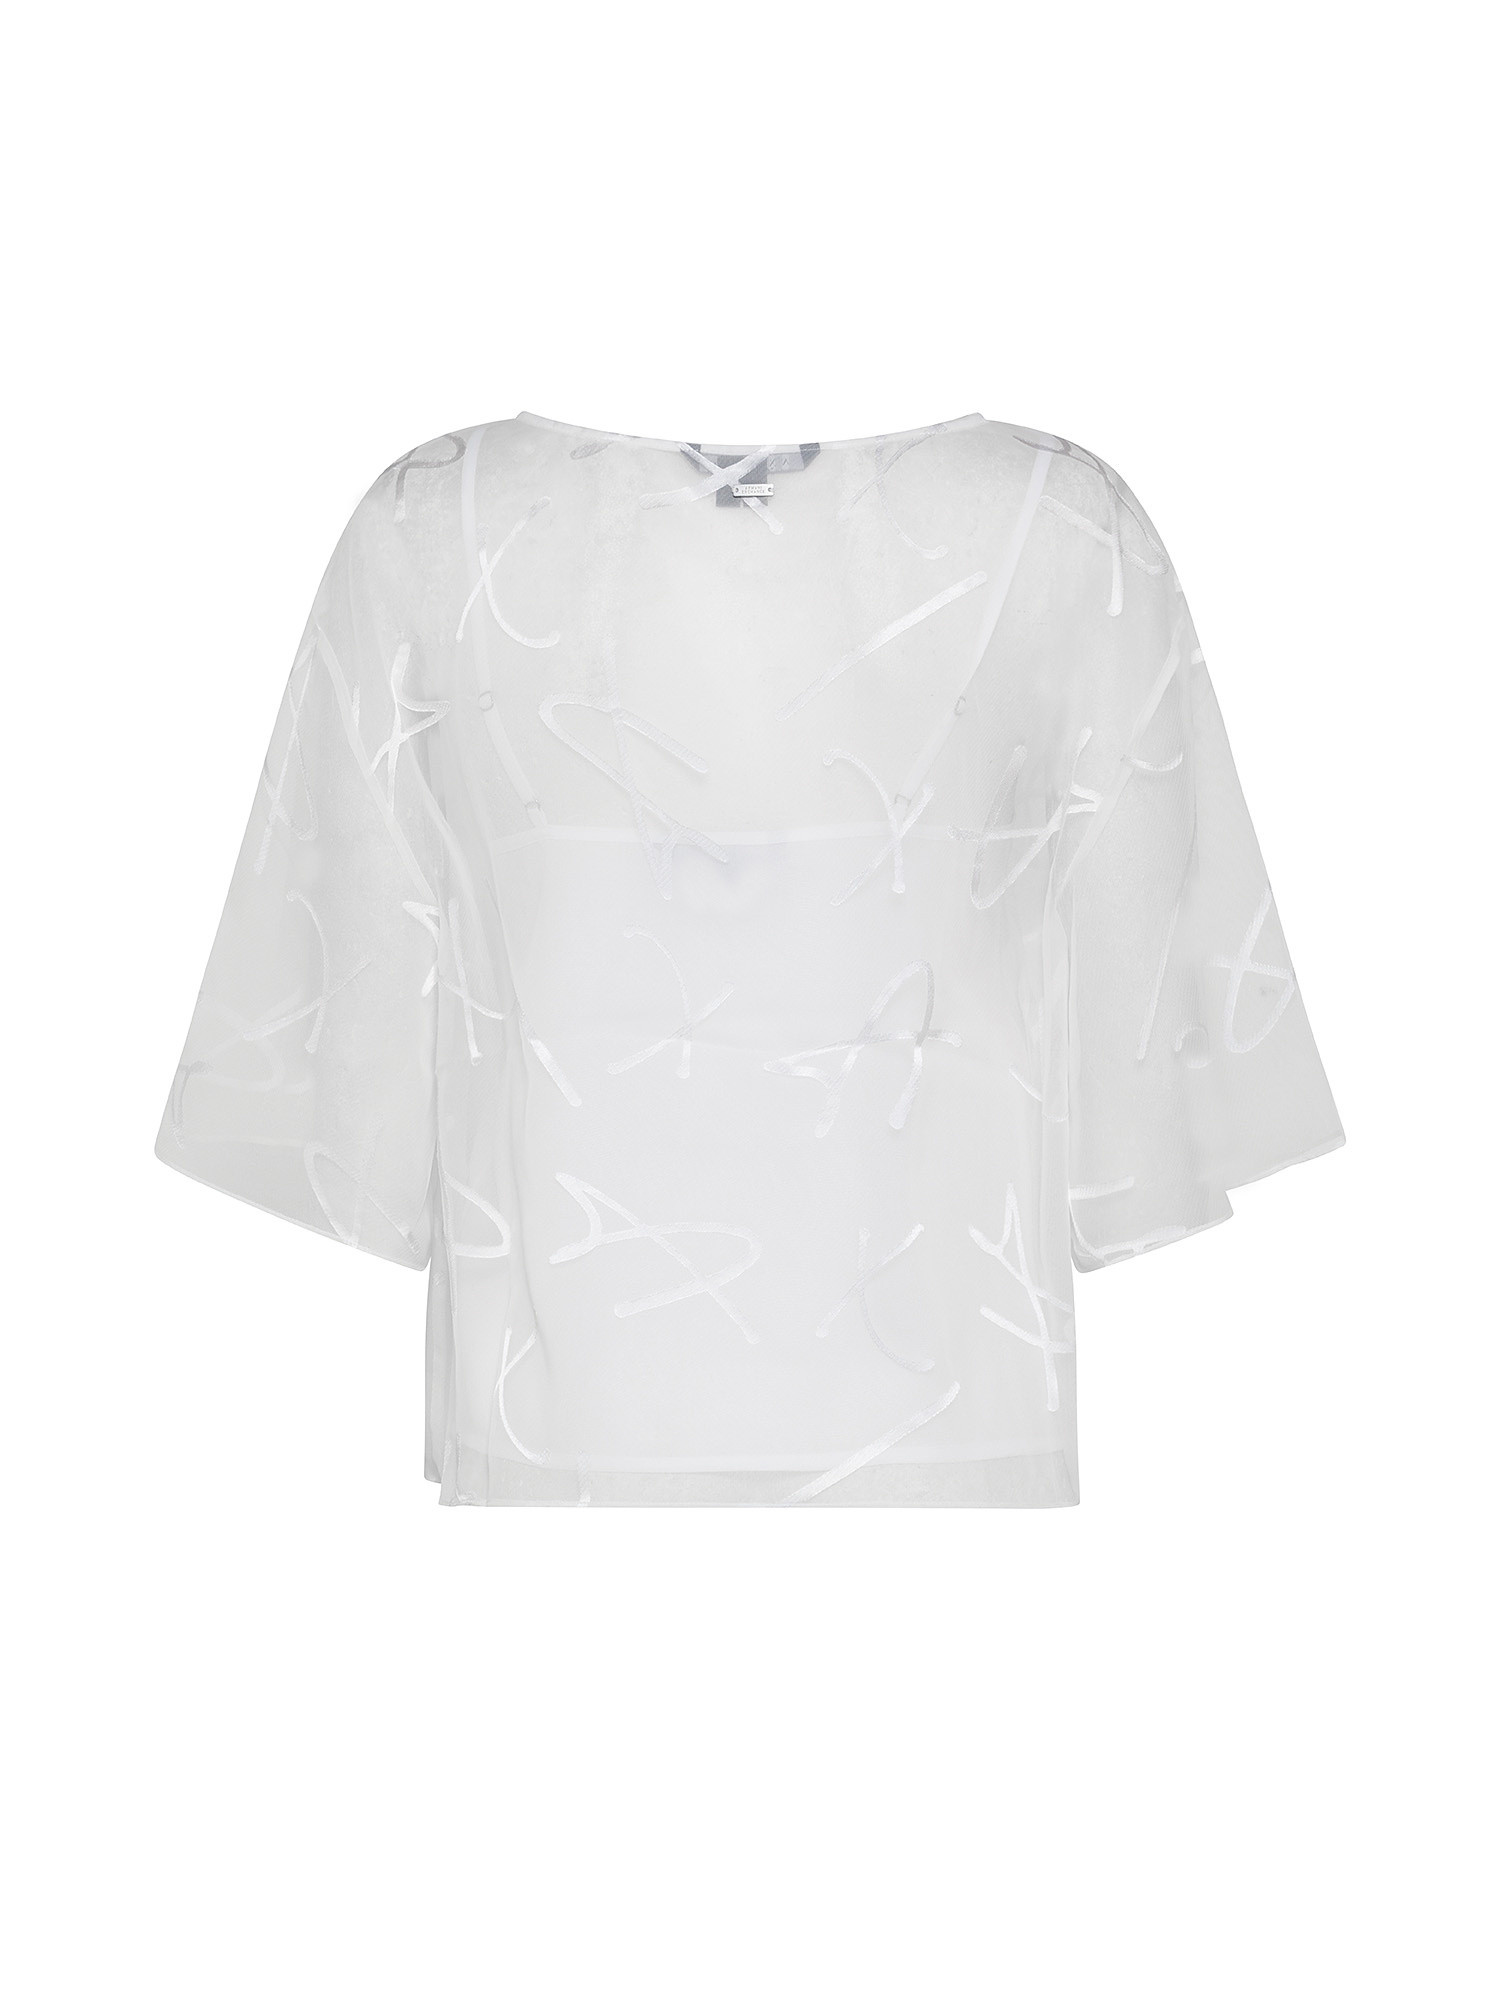 Armani Exchange - Blouse with all over logo lettering, White, large image number 1